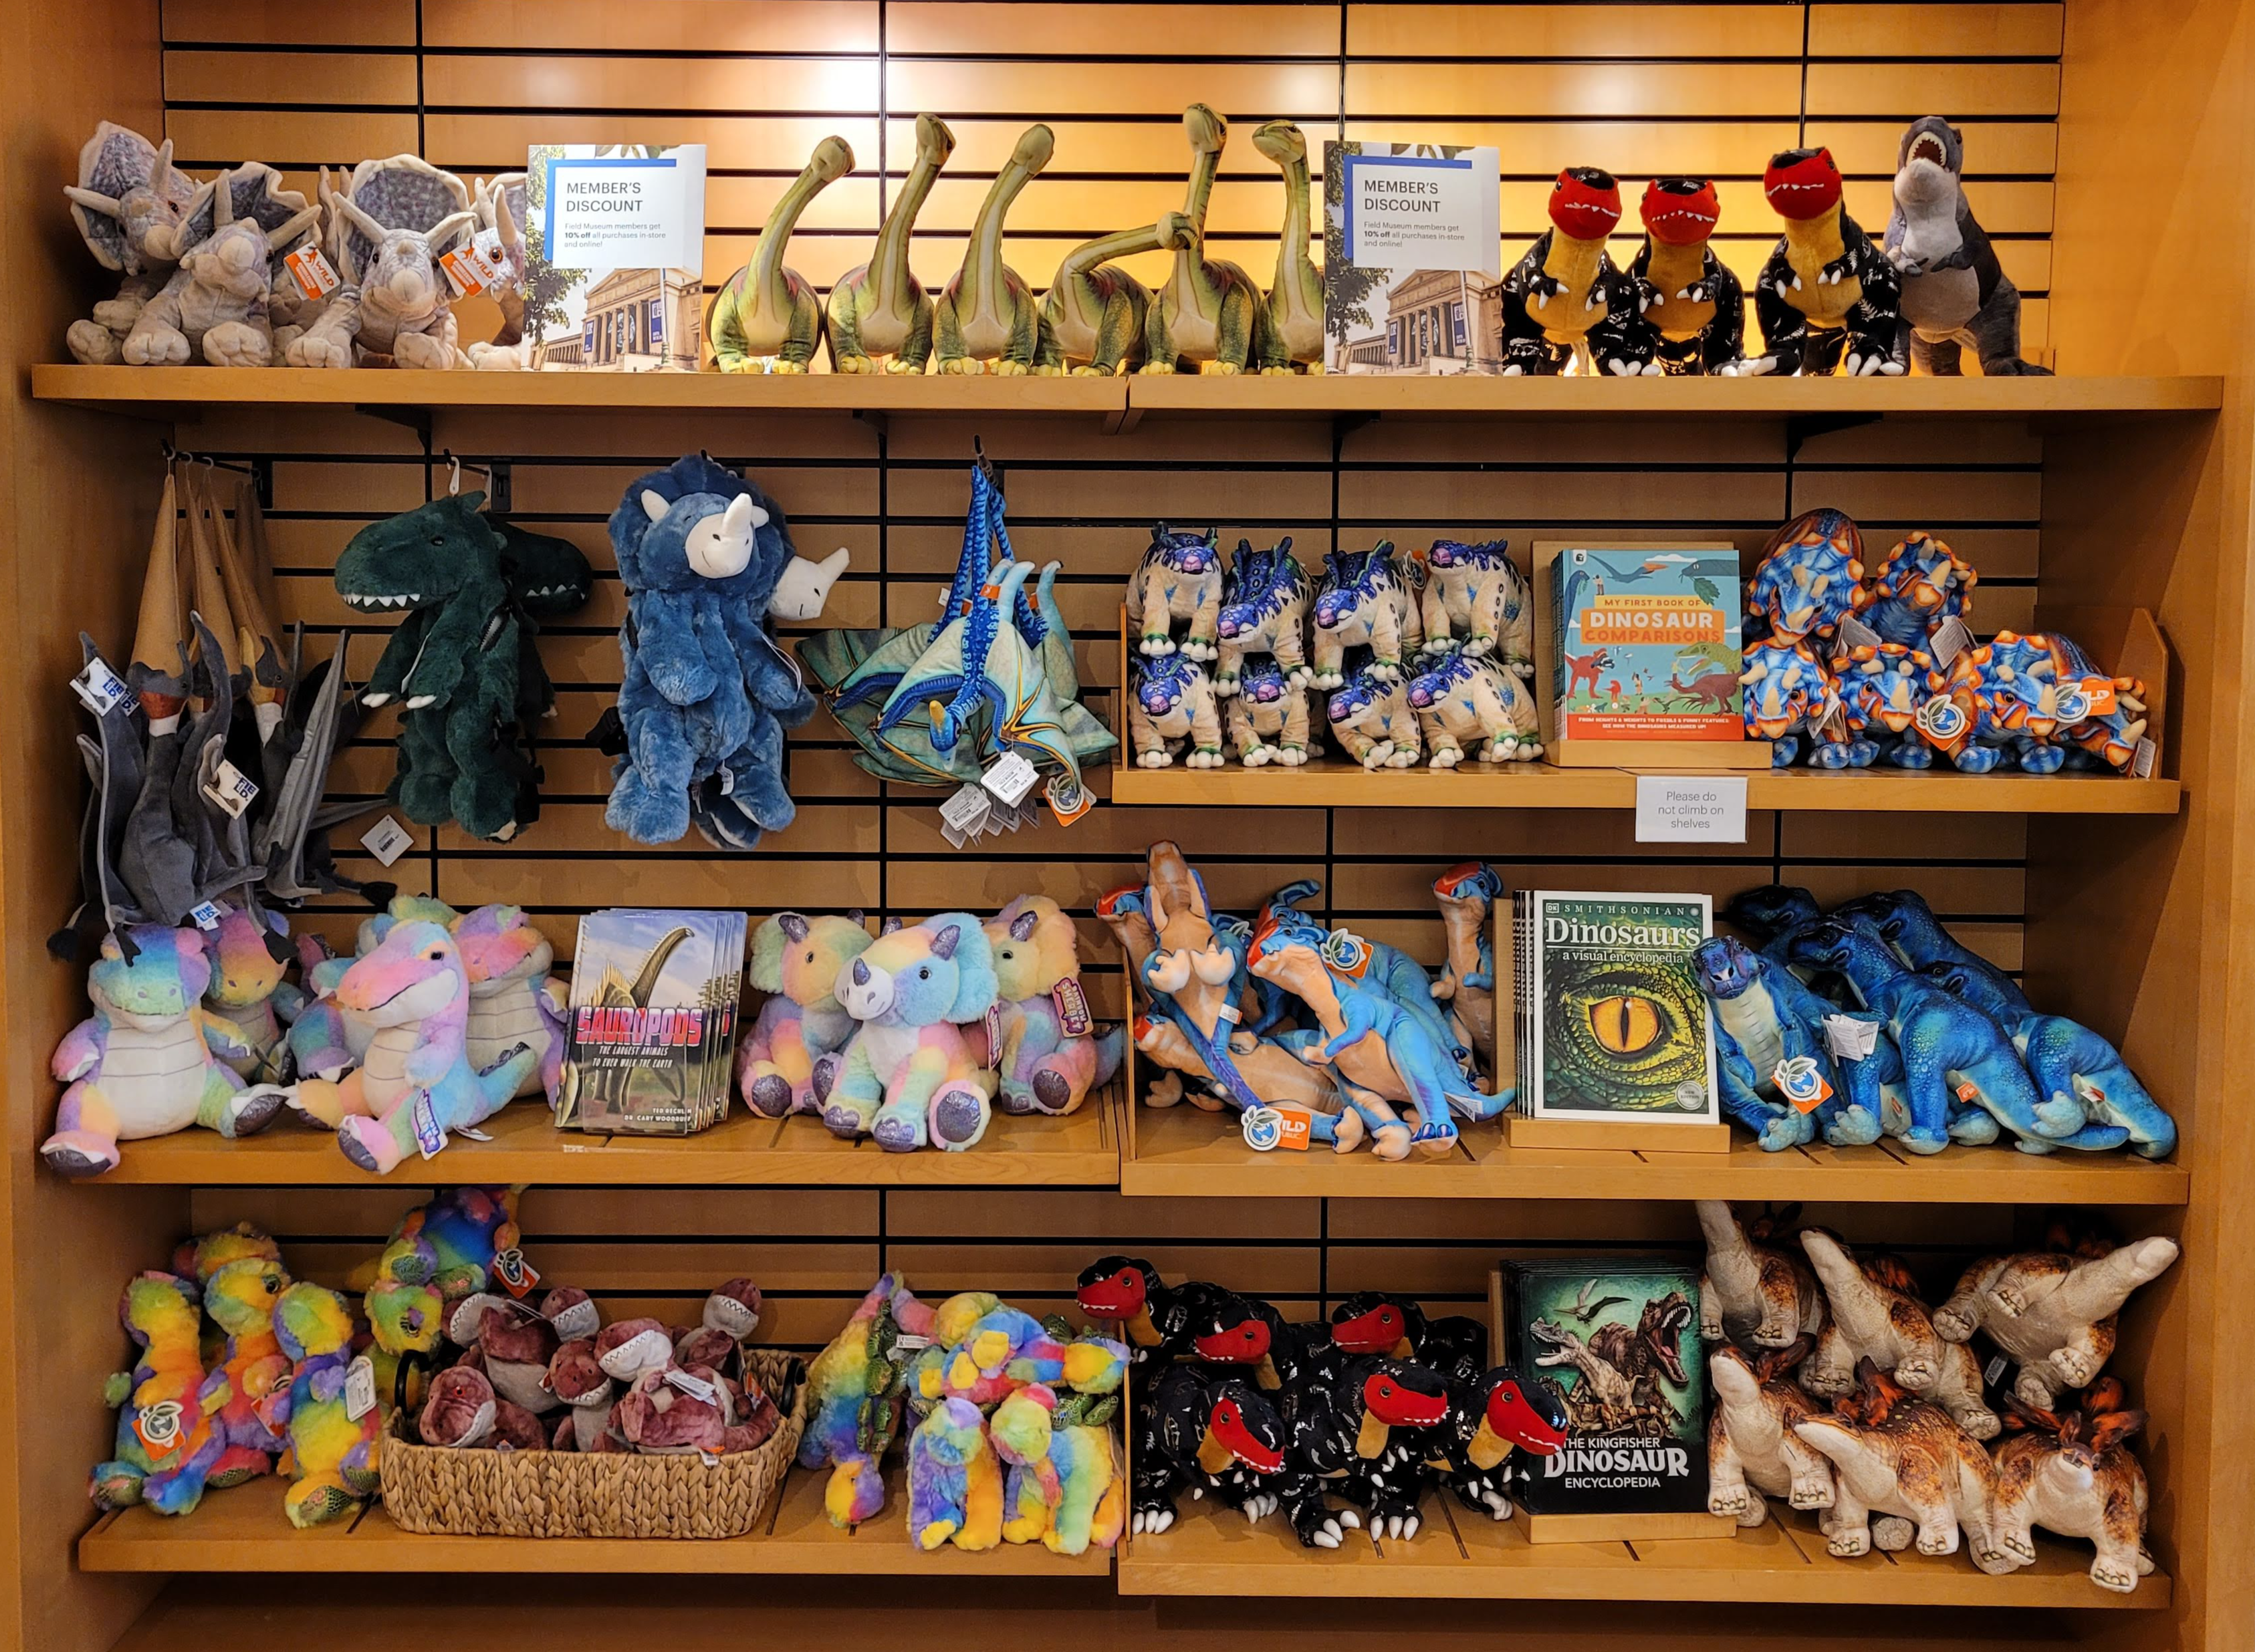 Shelves in the museum shop displaying plush dinosaur toys and books